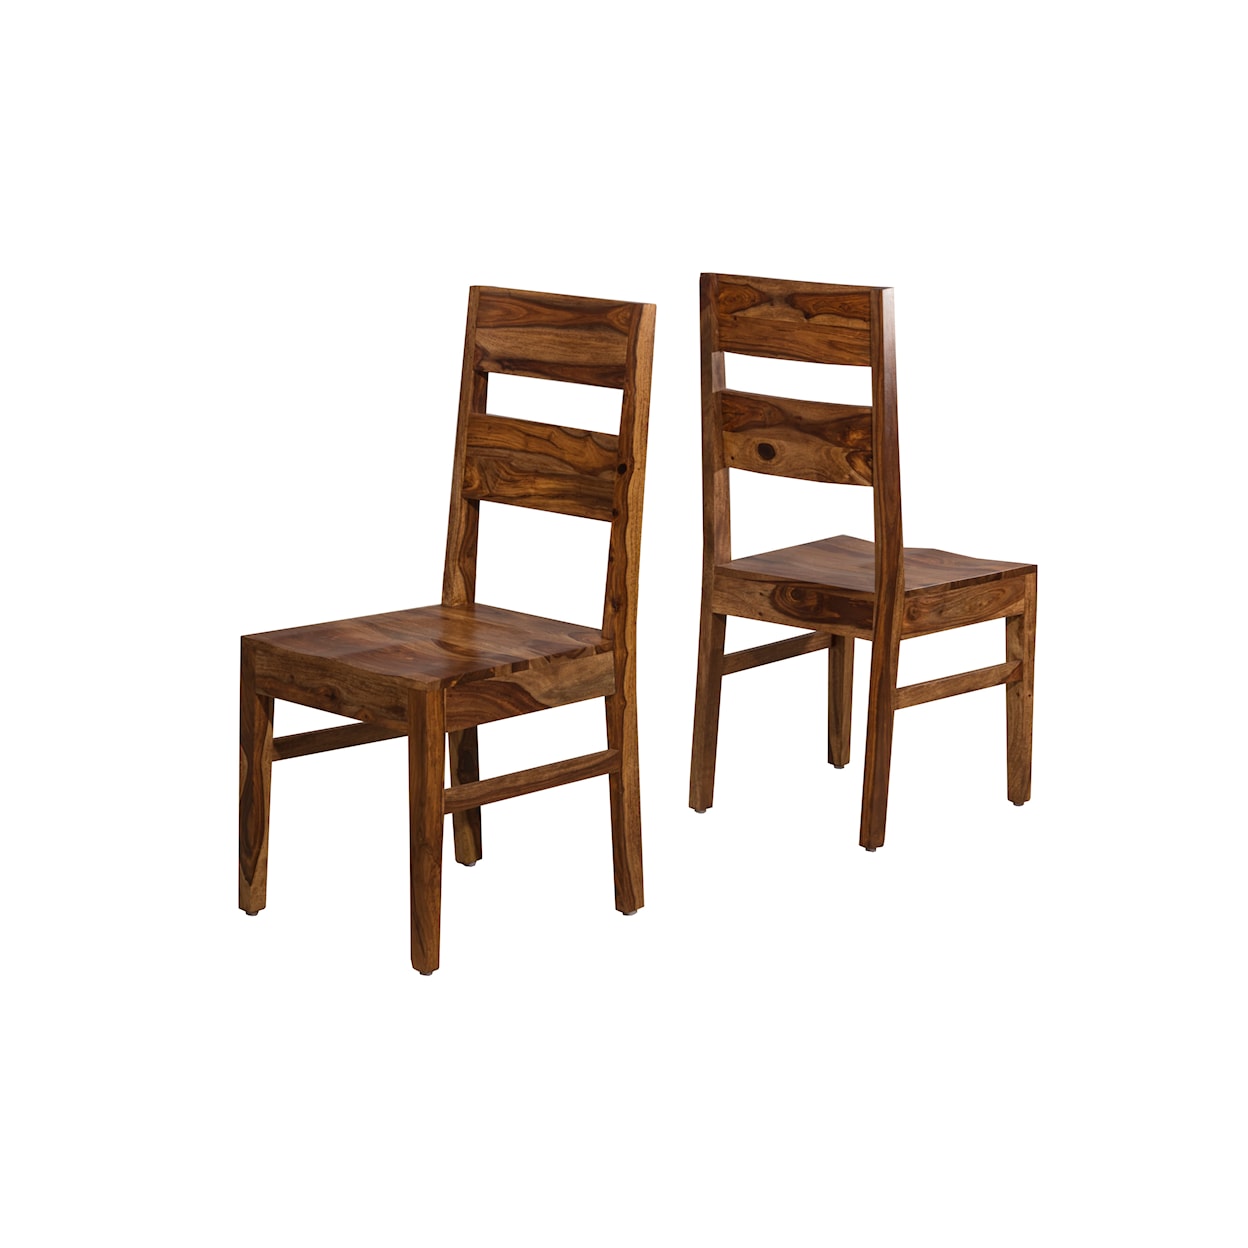 Hillsdale Emerson Dining Chair